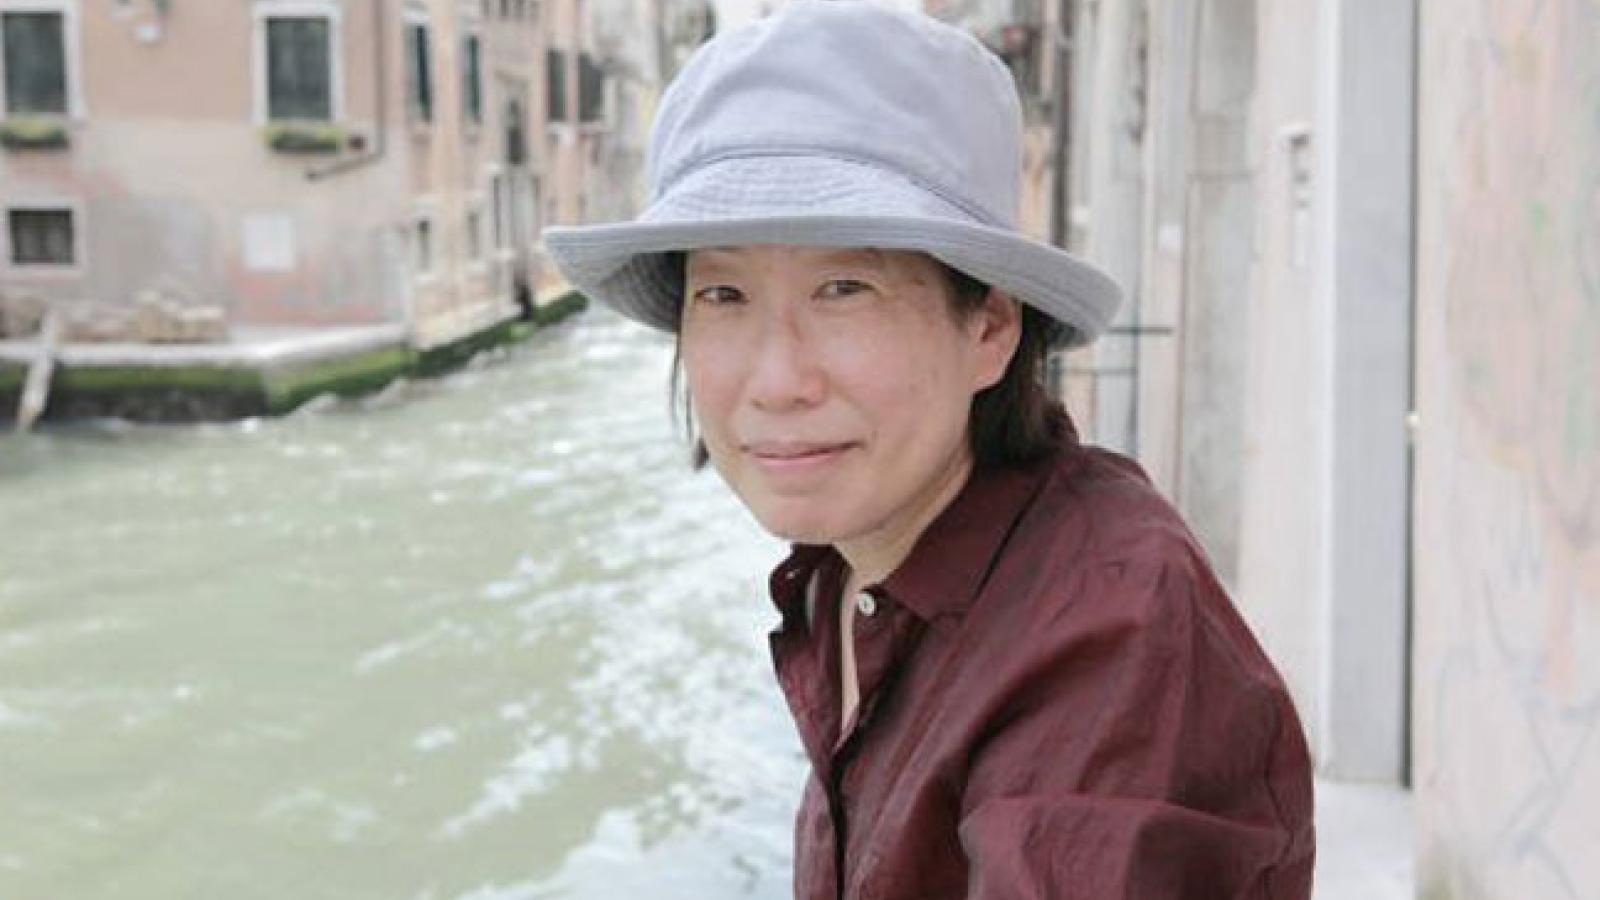 Acclaimed Author Gish Jen To Be Guest Speaker at 2022 McKinney Award Ceremony